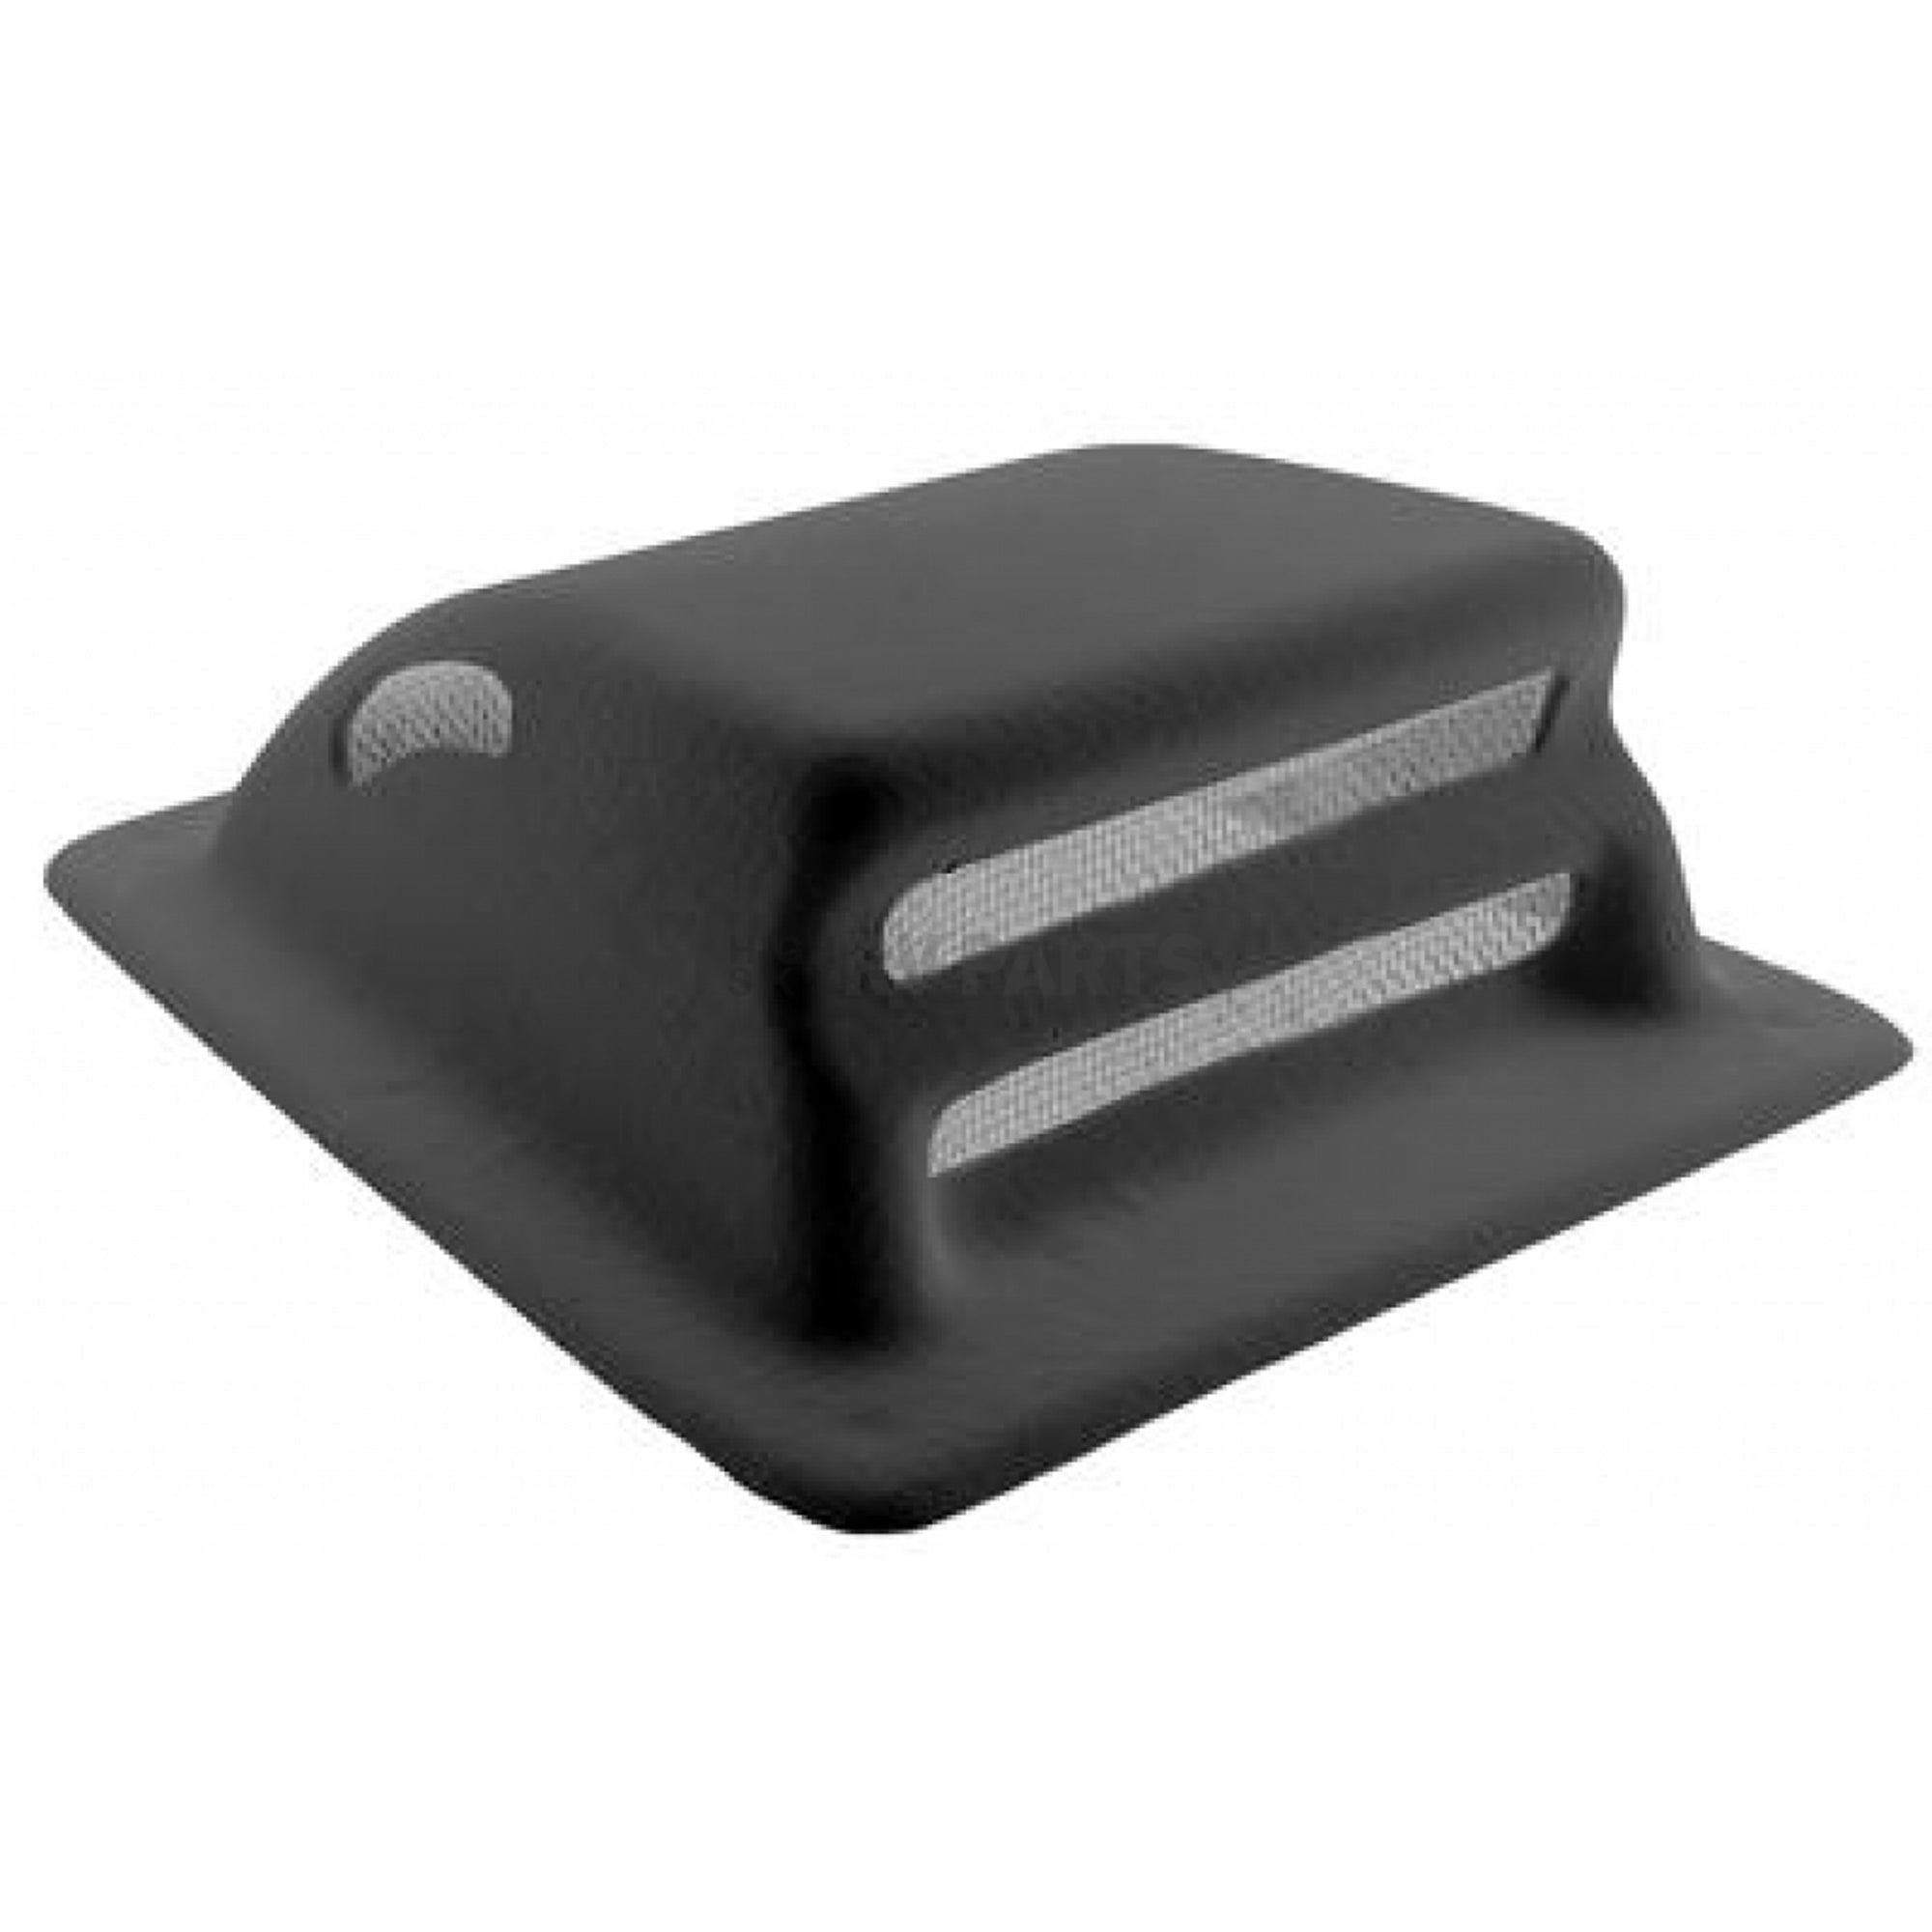 Icon 12581 Holding Tank Vent Pipe Cover Plumbing Stack Shroud - Black